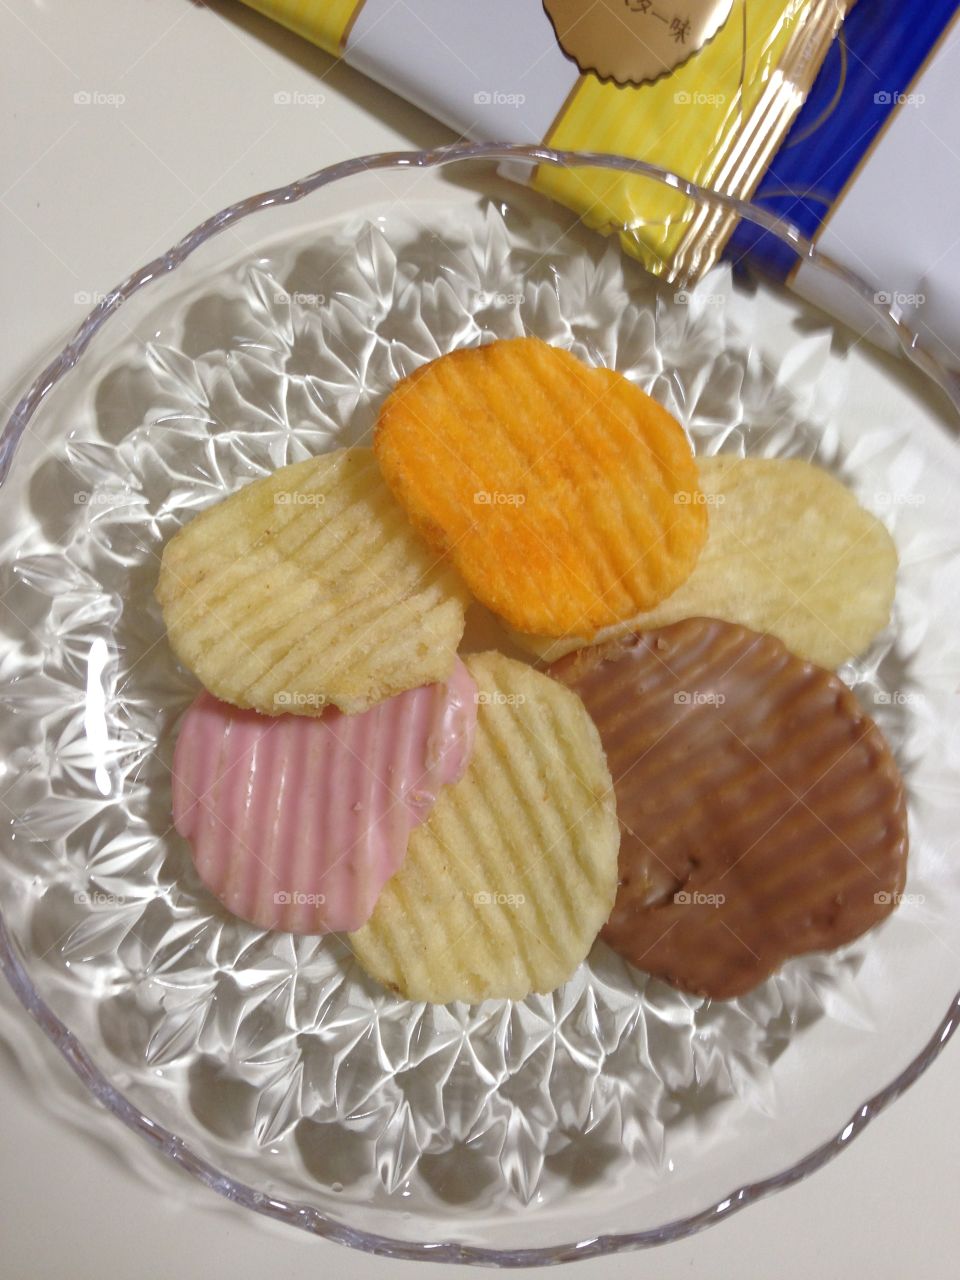 Colorful potato crisps from GRAND cal bee